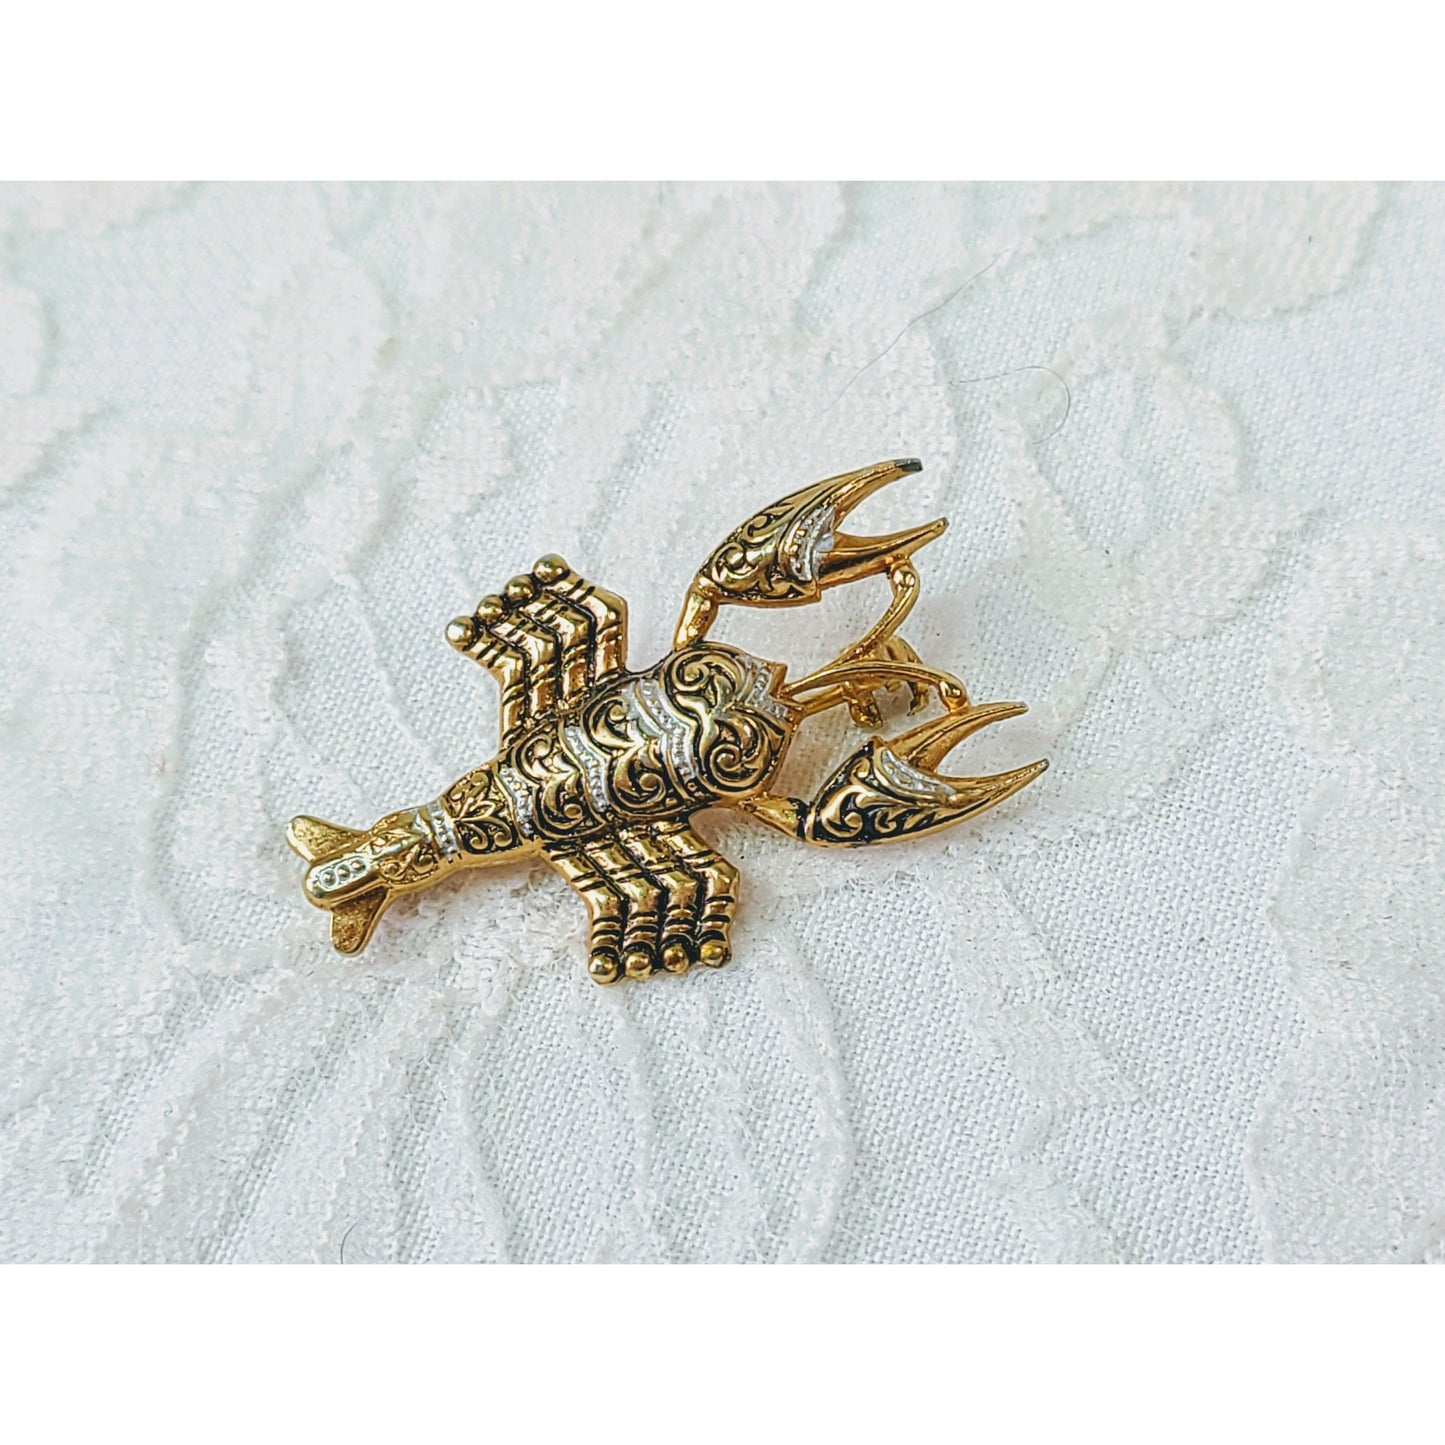 LOBSTER Rhinestone Brooch Tie Tack Lapel Pin ~Gold Tone and Silver